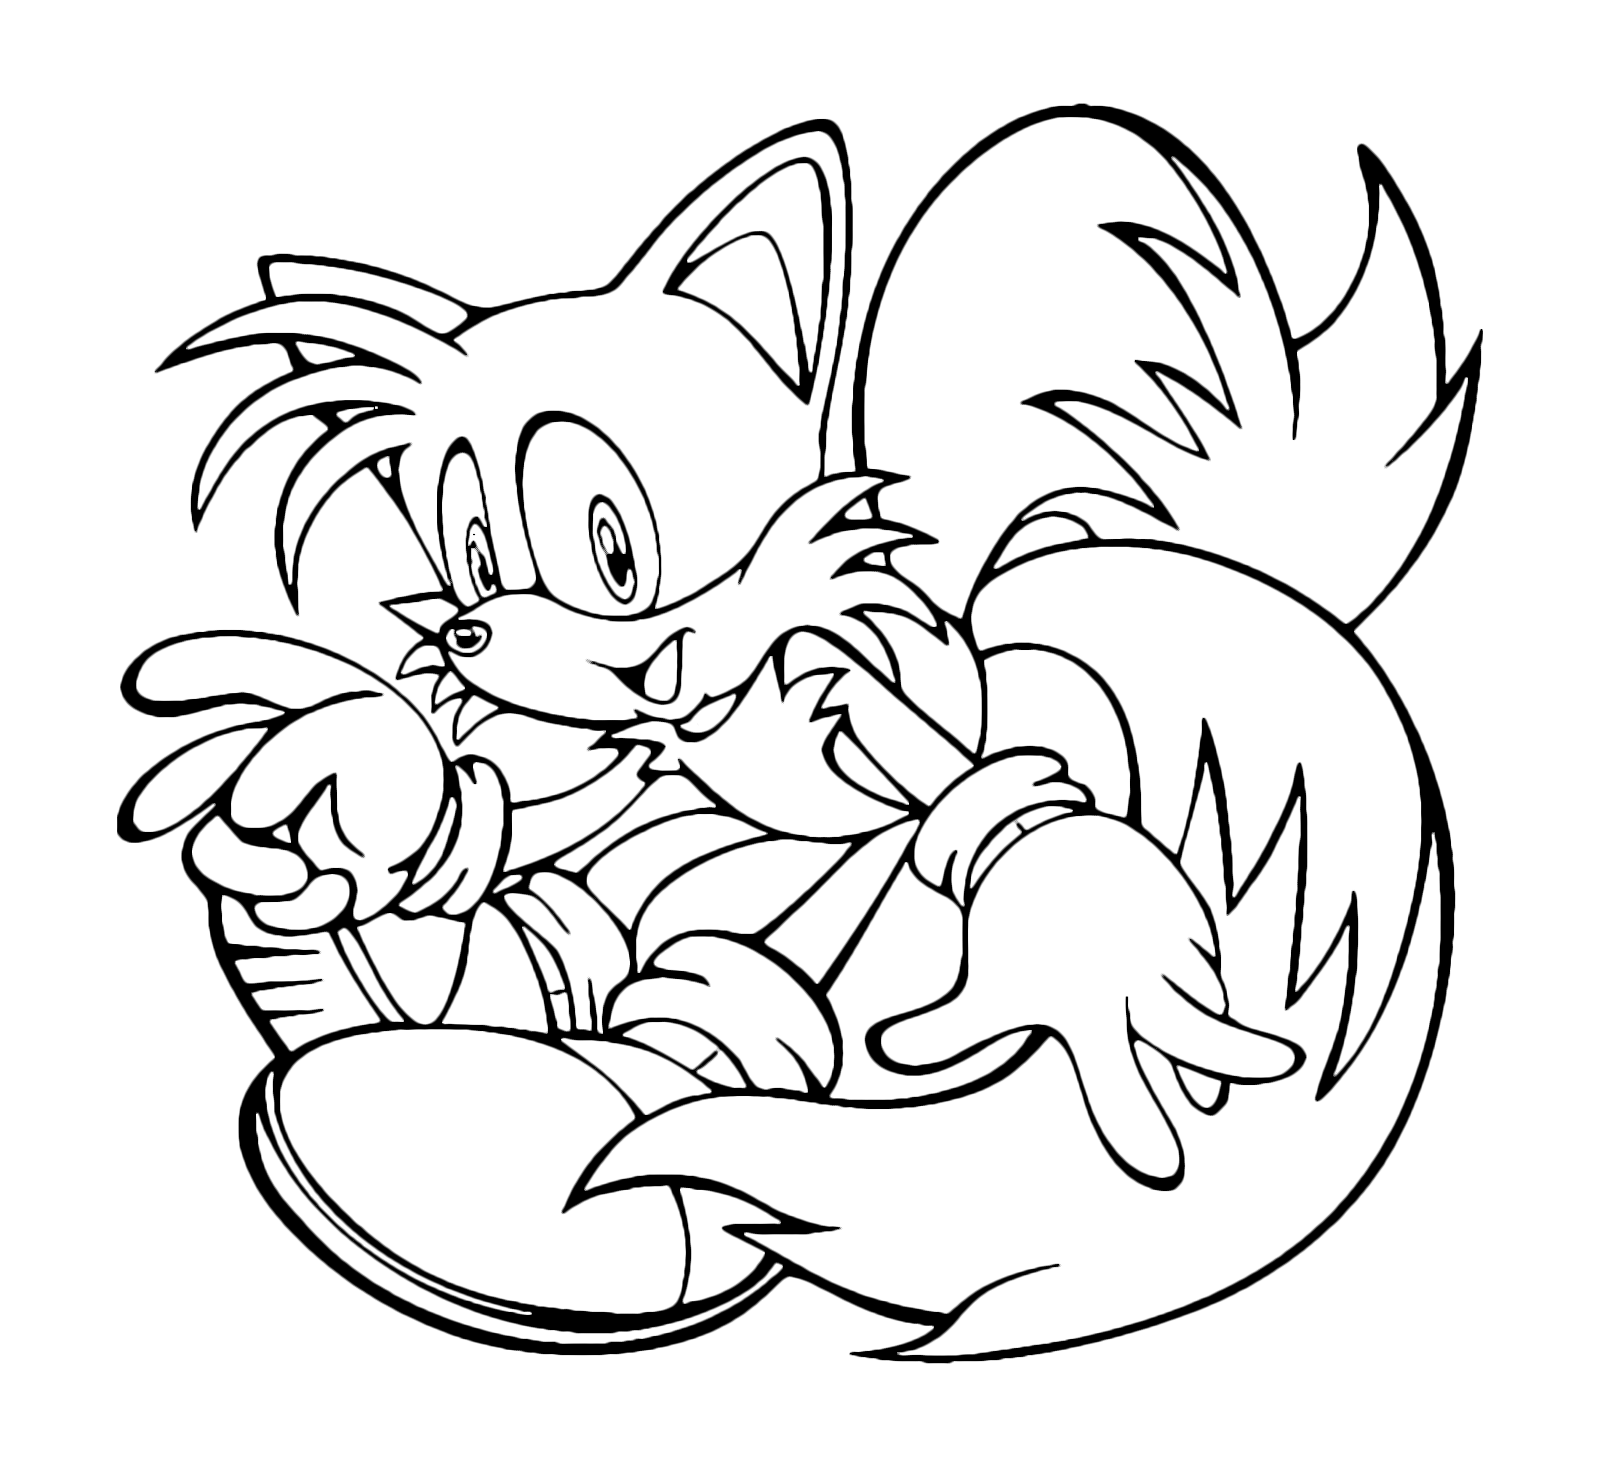 Sonic And Tails Coloring Pages - Free Printable Templates